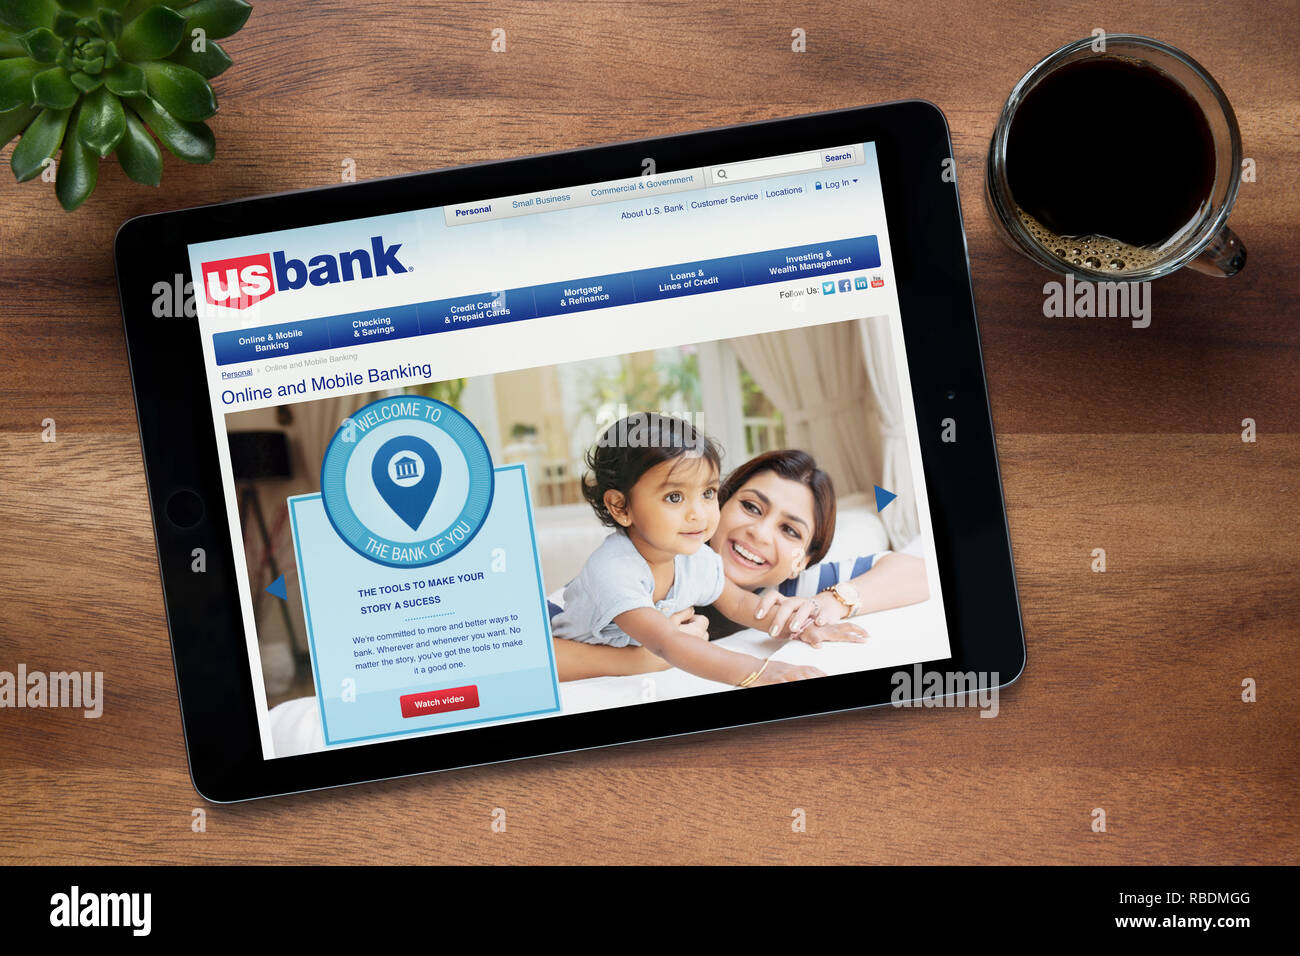 The website of US Bank is seen on an iPad tablet, on a wooden table along with an espresso coffee and a house plant (Editorial use only). Stock Photo